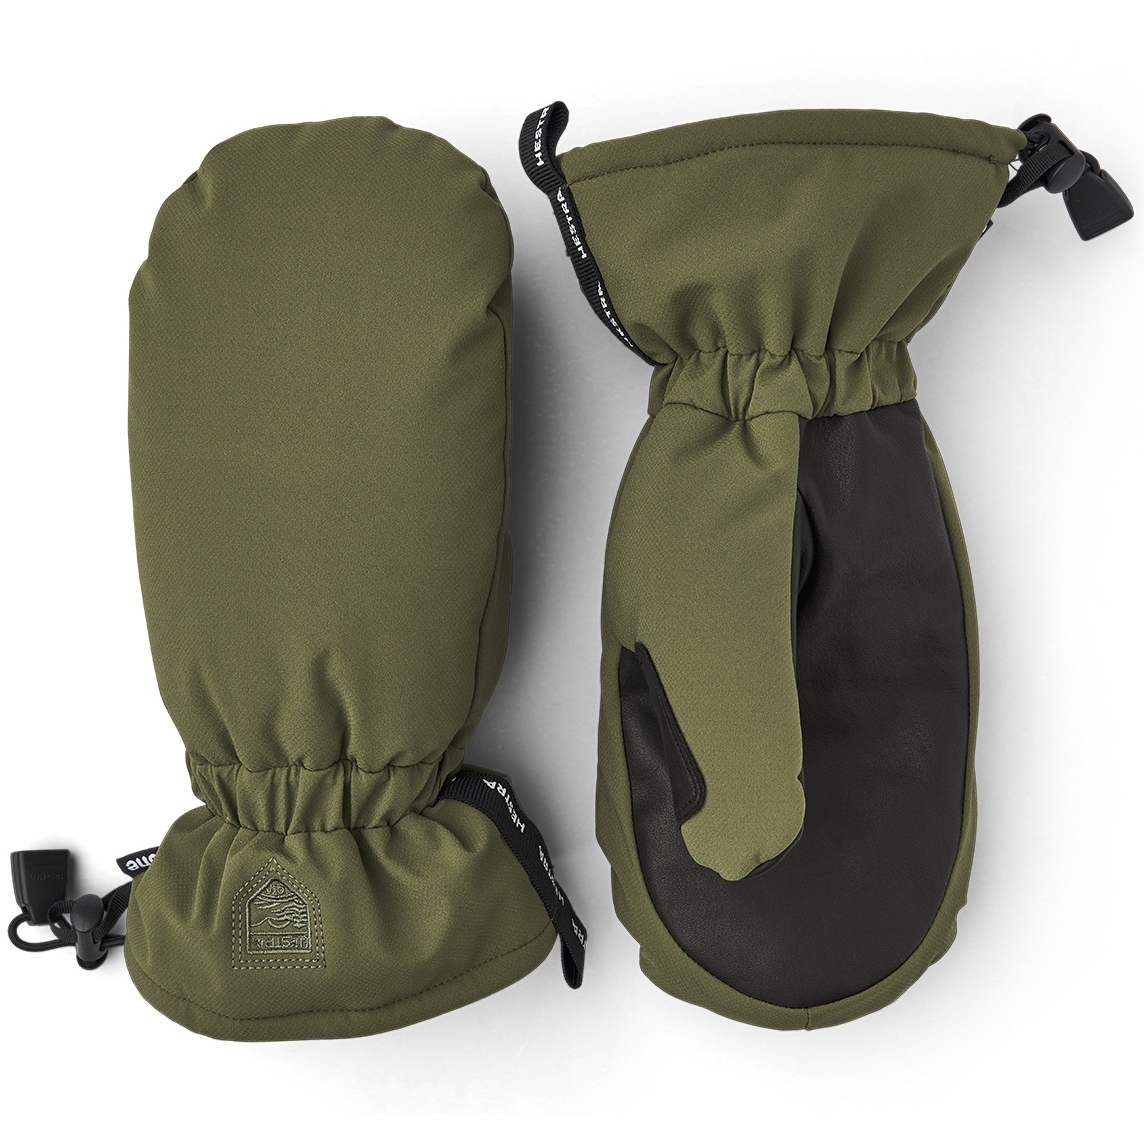 Picture of Hestra Mist Mittens - olive